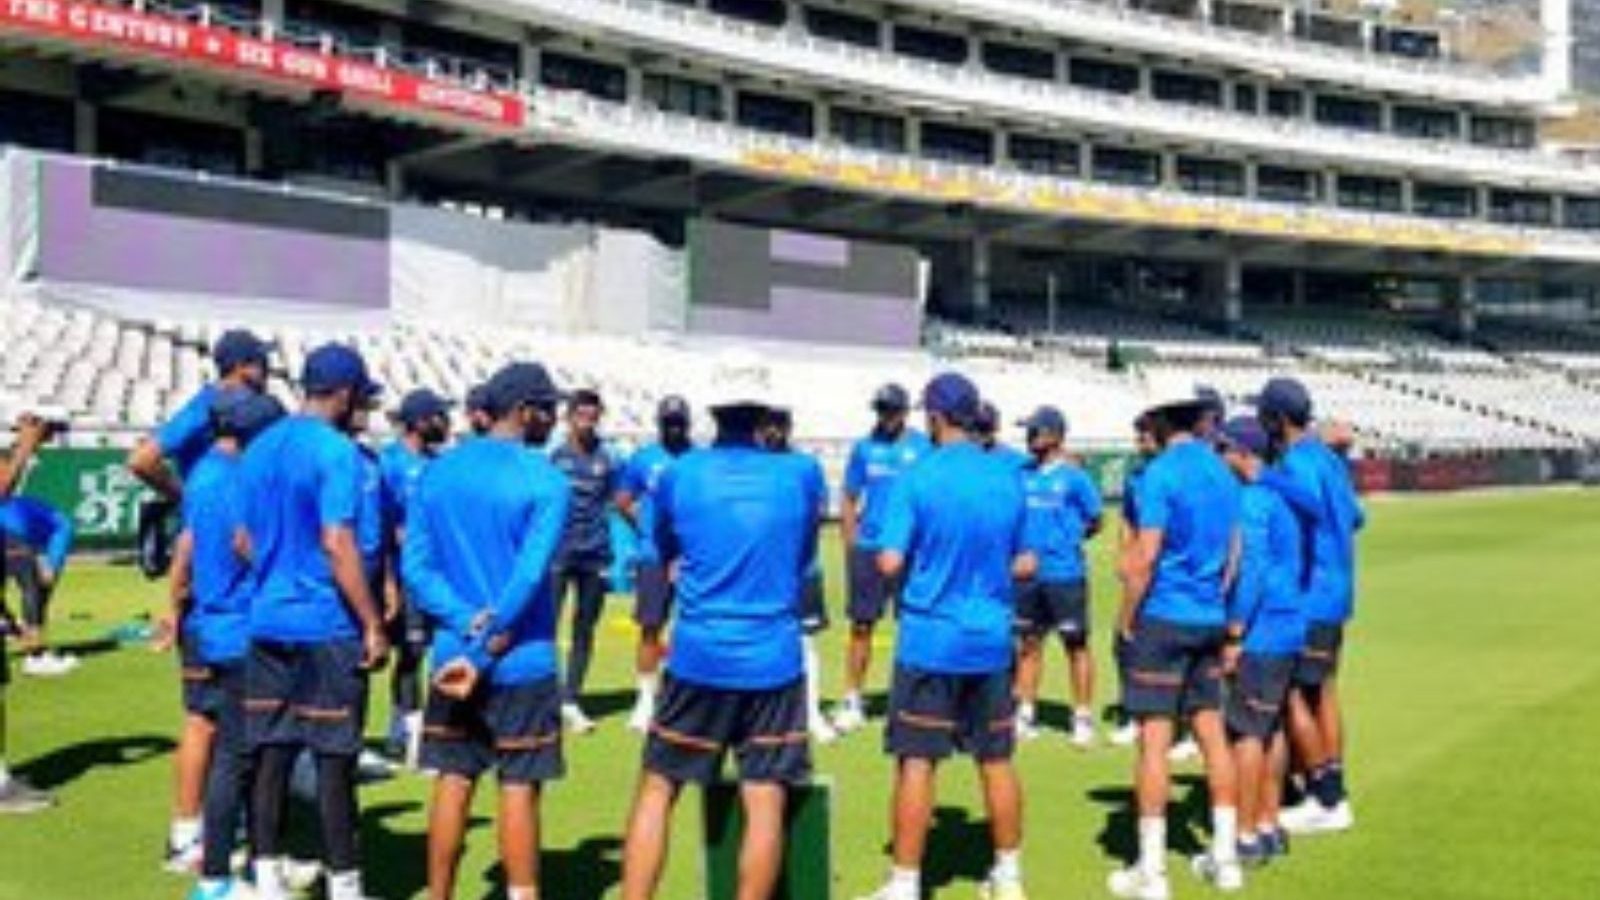 IND vs SA, 3rd Test, Day 1, Live Cricket Score: Virat Kohli Returns as India Eye First-ever Test Win in Cape Town